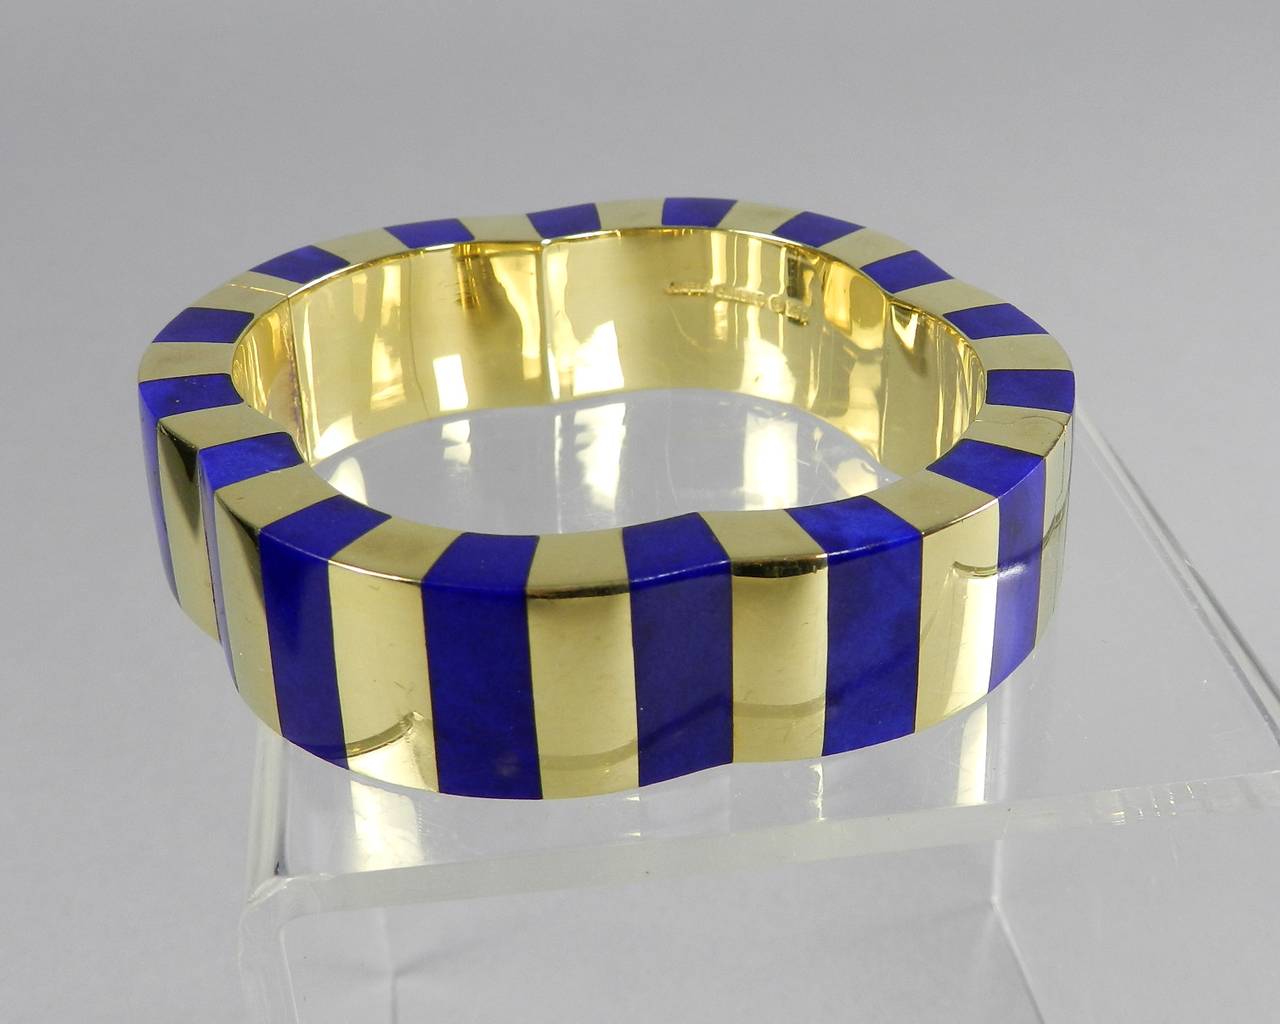 Angela Cummings 18k yellow gold and lapis lazuli hinged bangle bracelet. She designed jewelry at Tiffany and Co. from 1969 to 1984.  This bracelet is hallmarked 